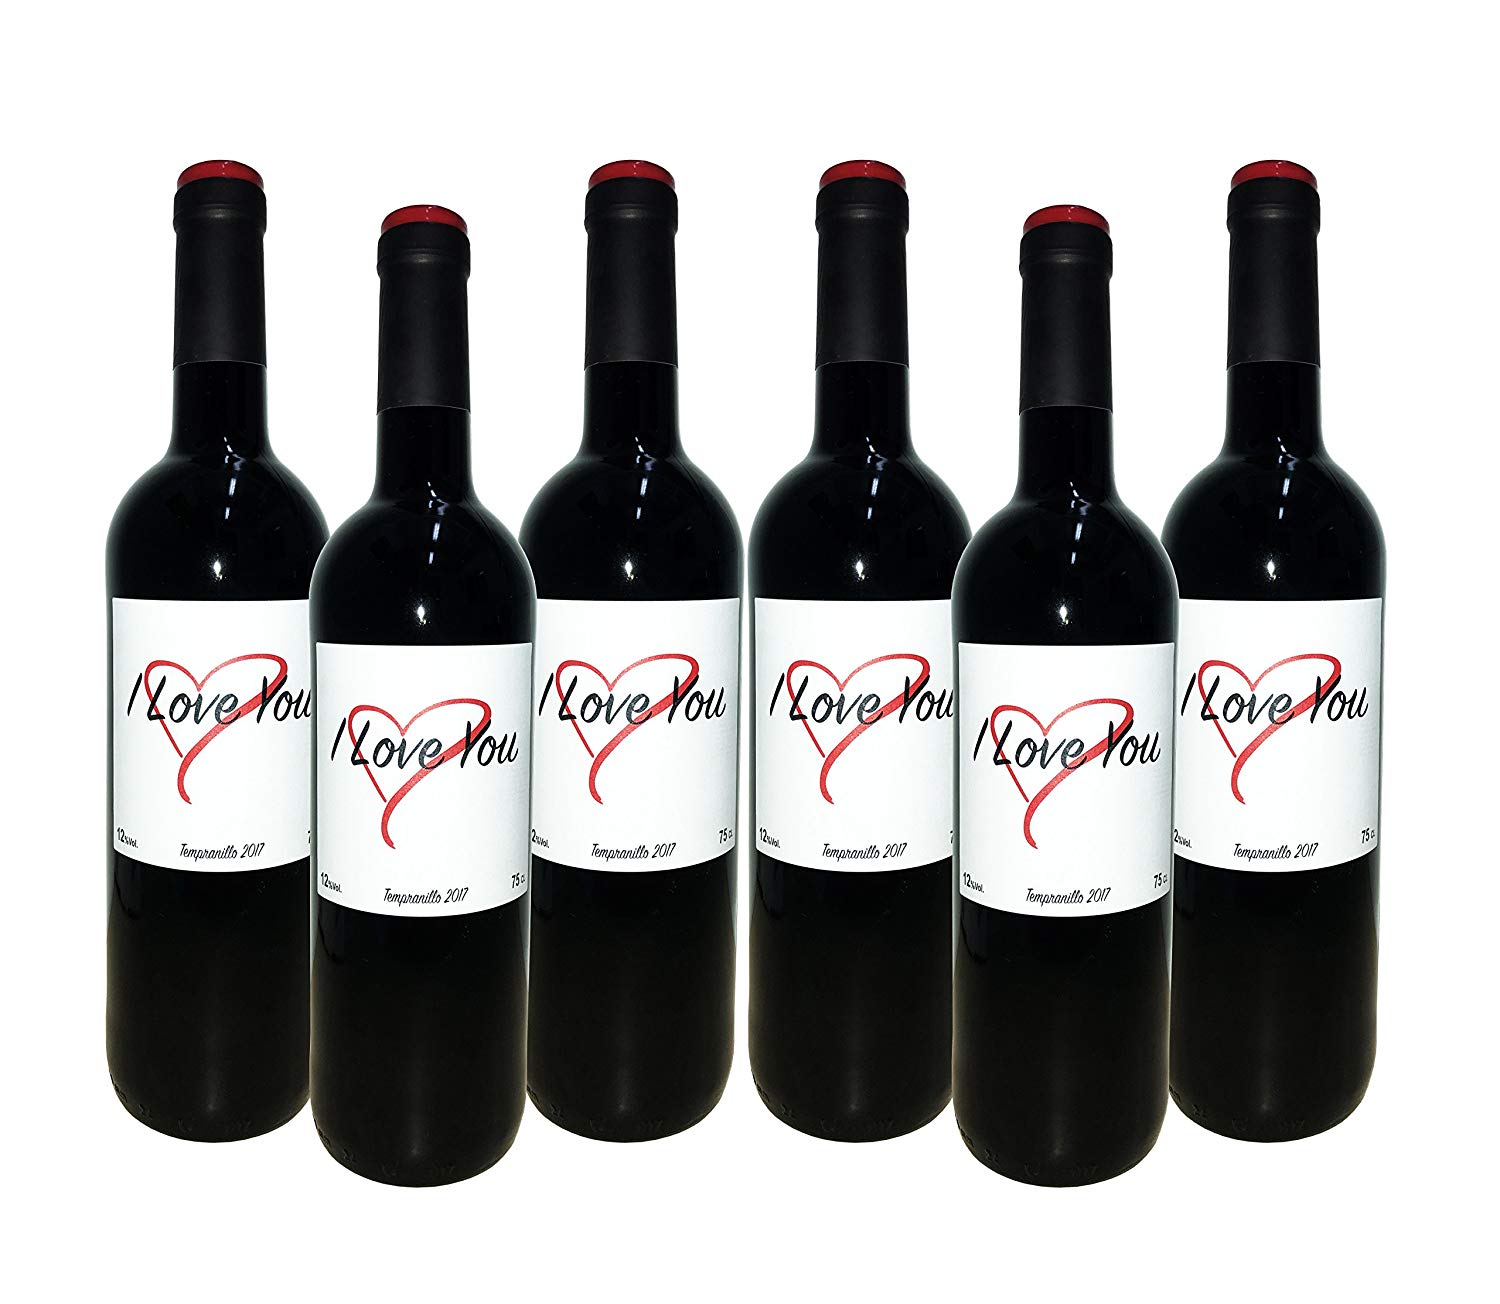 Vino tinto I love you x6 uds solo 11,9€